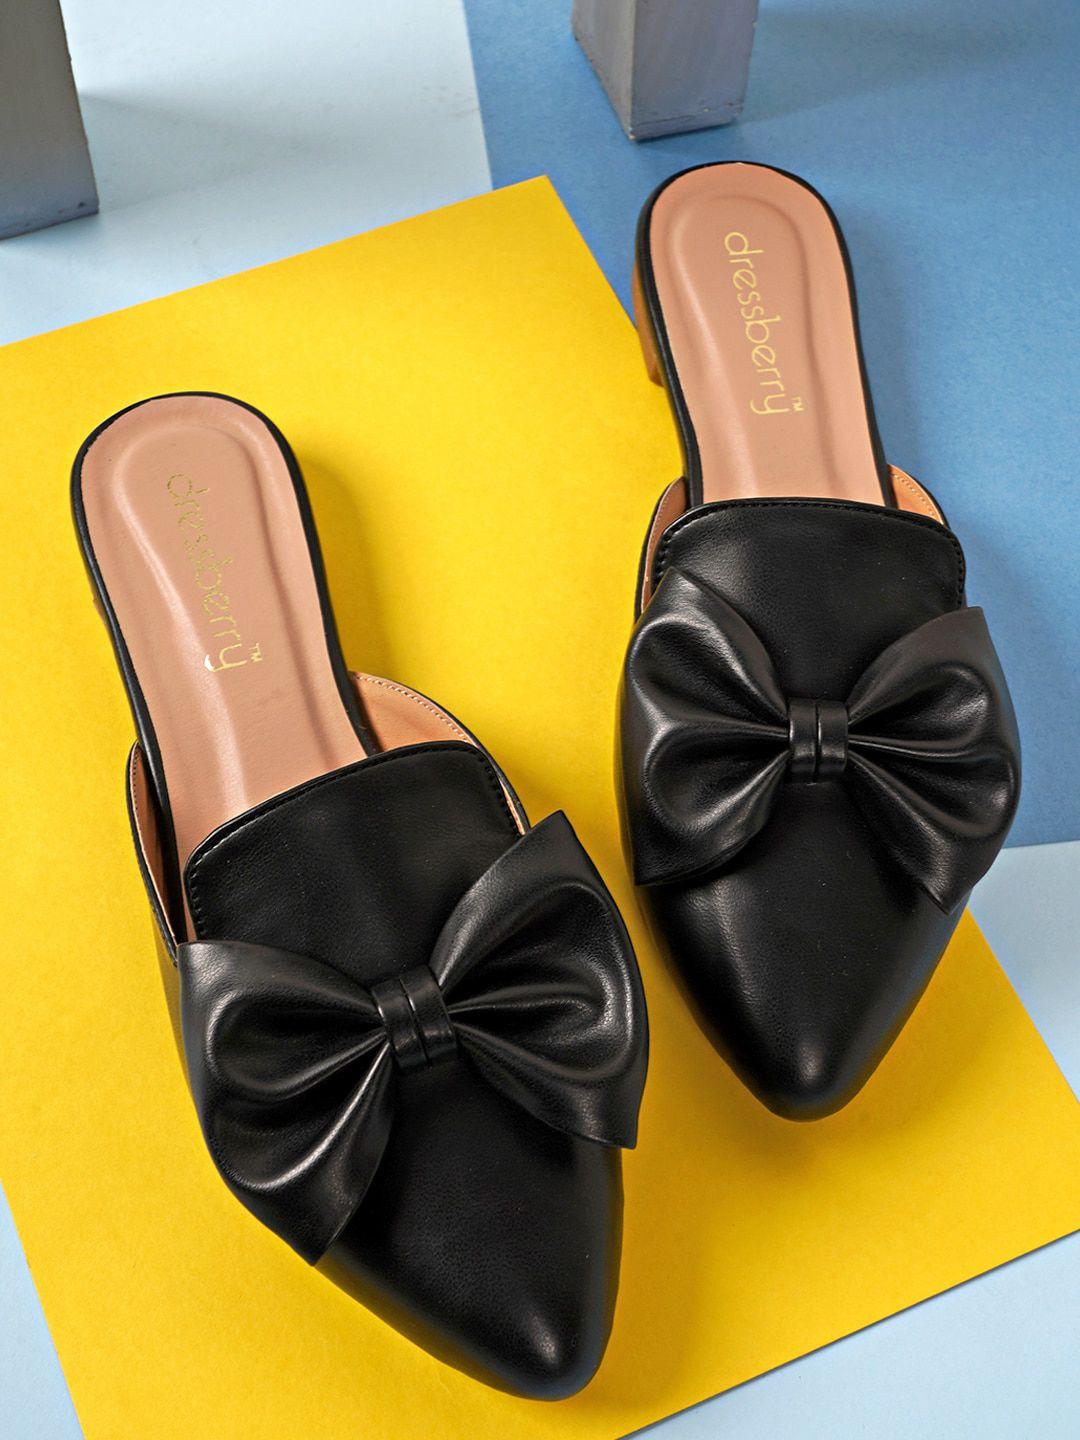 dressberry women black mules with bows flats